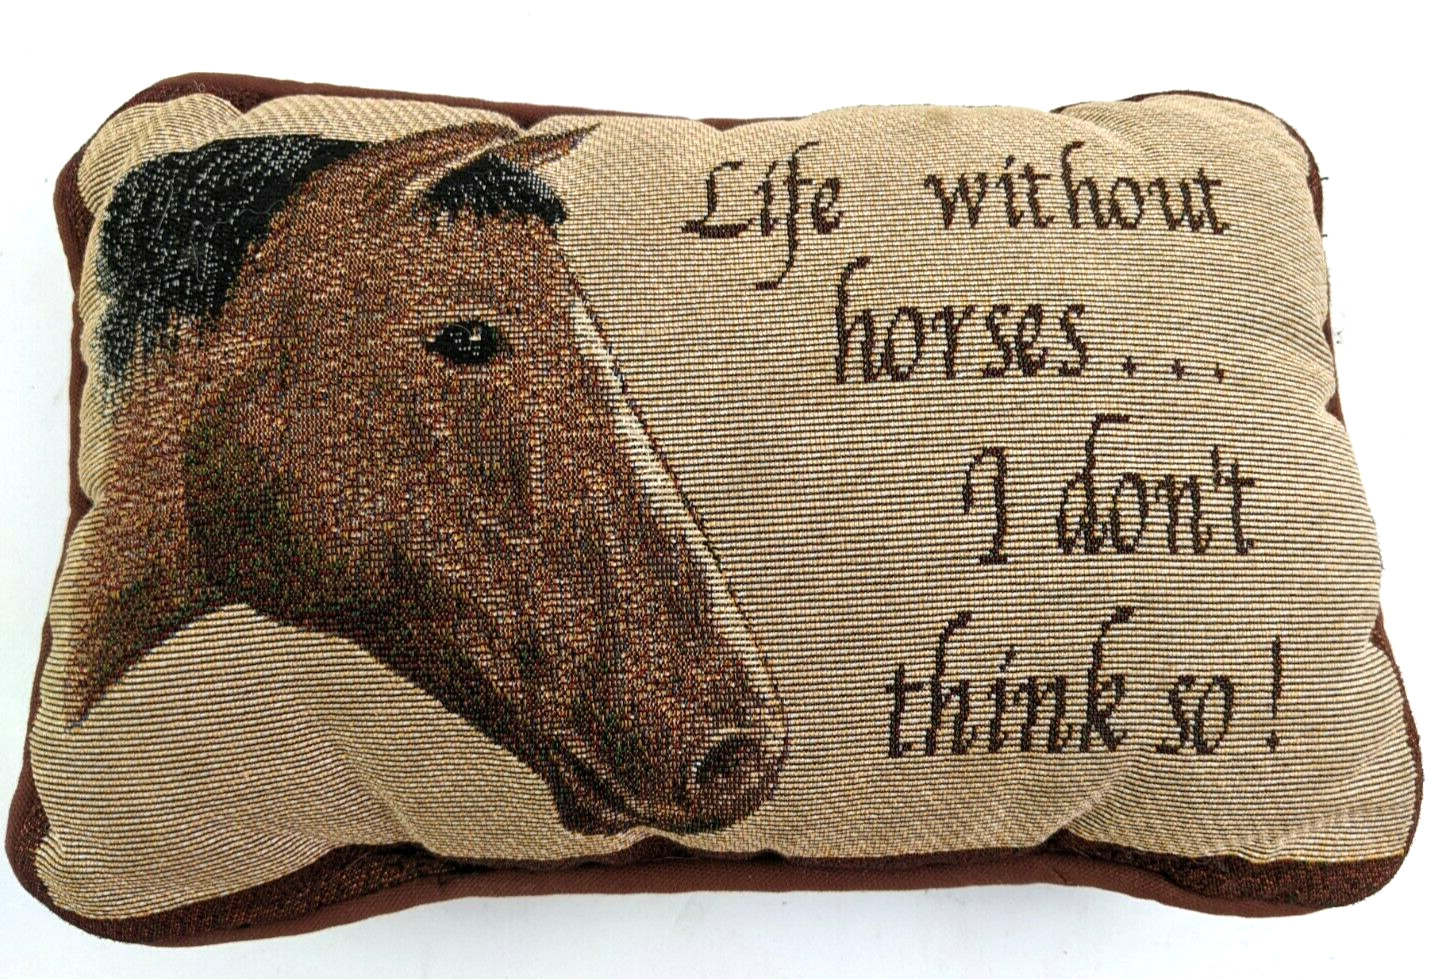 Life Without Horses Pillow Tapestry 8"x12" Decorative